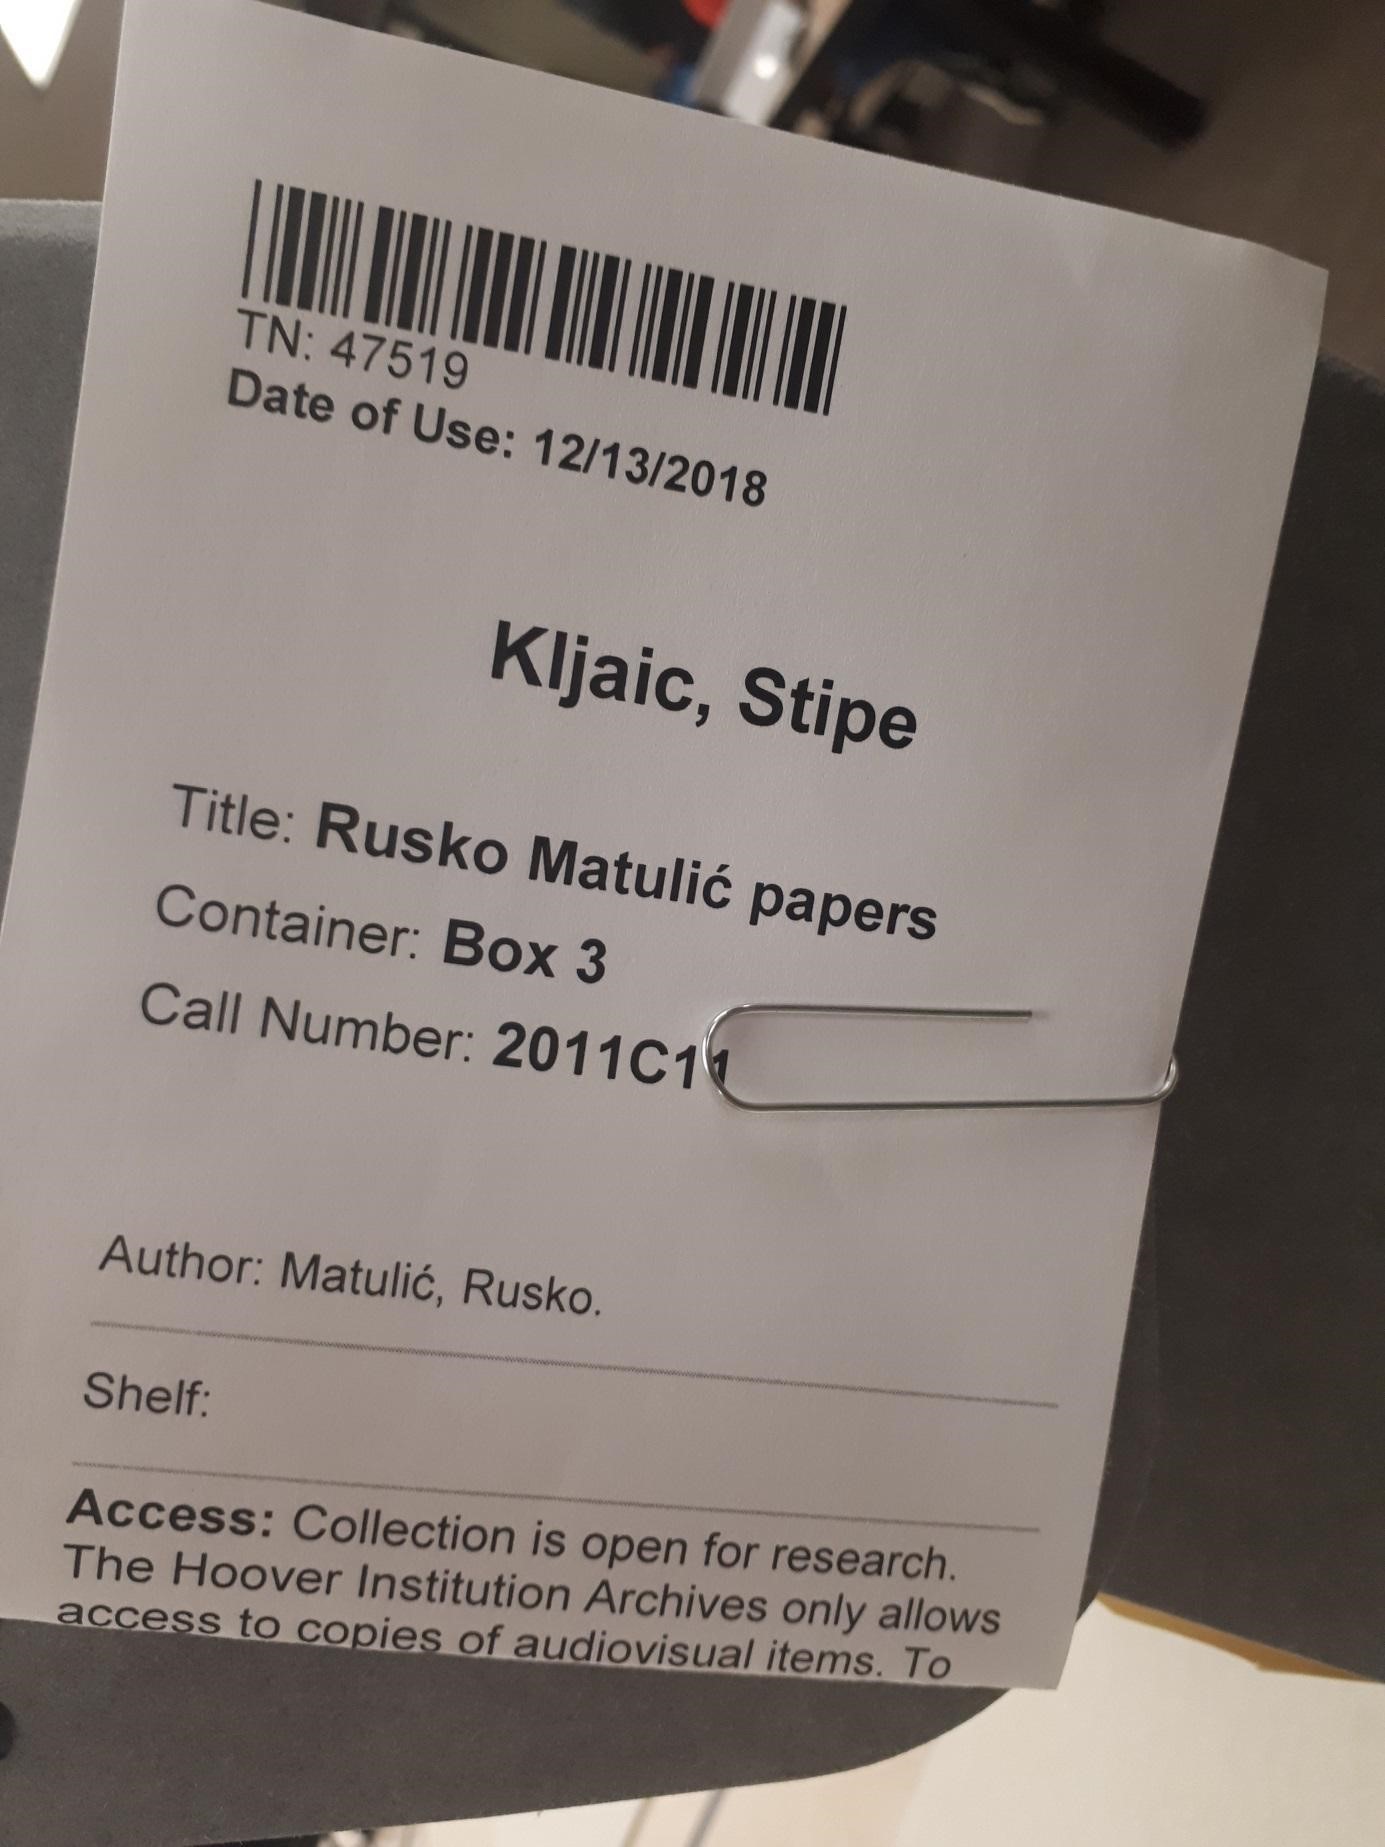 Rusko Matulić Papers, box 3 at the Hoover Institution Library & Archives.